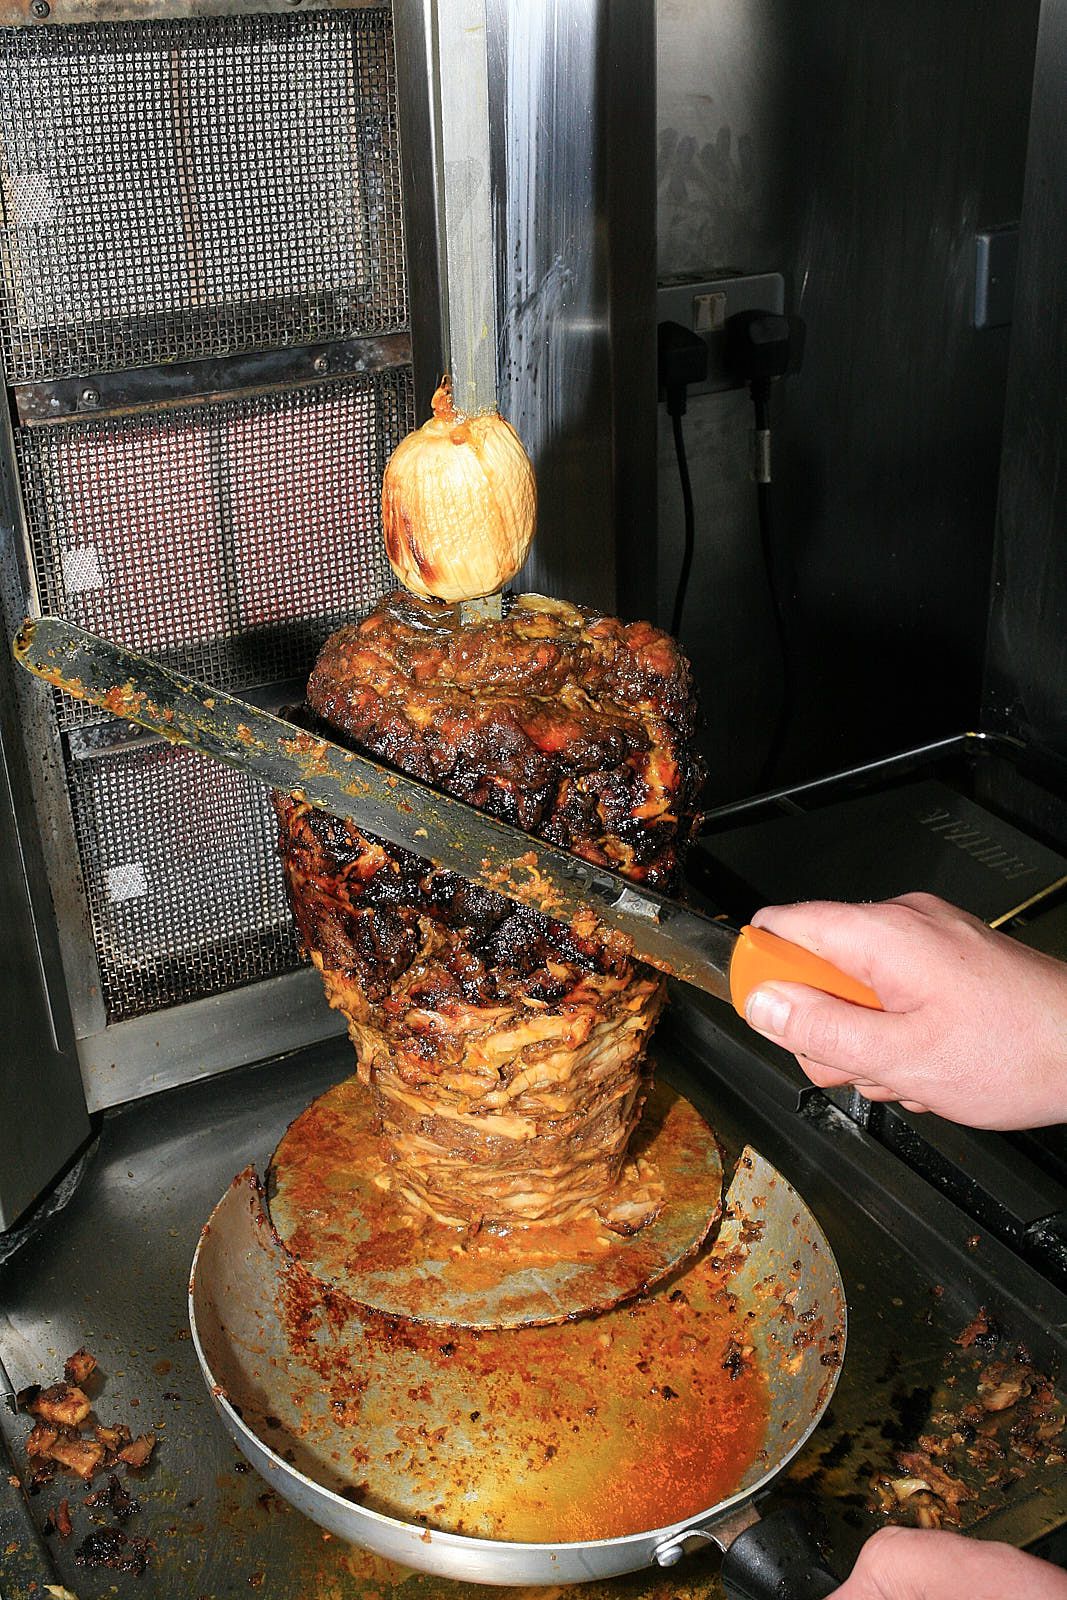 Shawarma turns on a traditional vertical spit